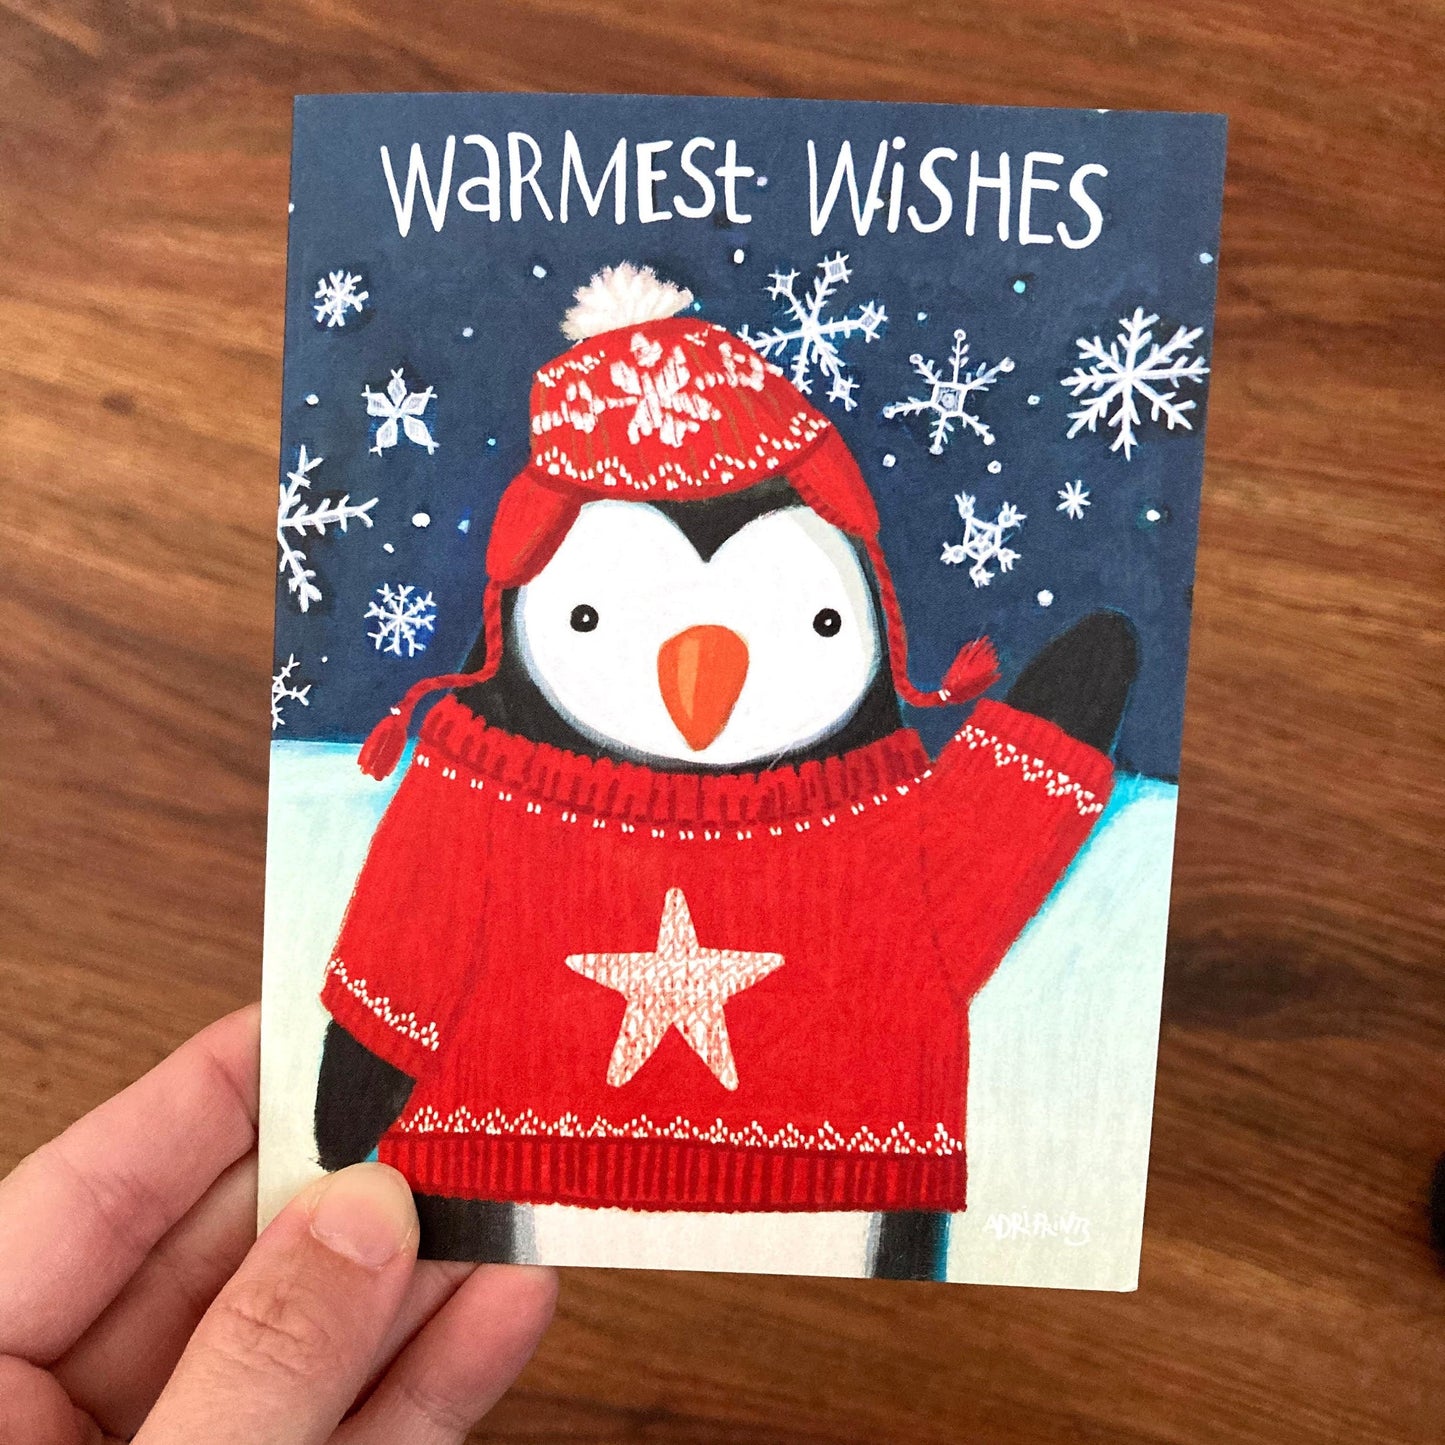 Penguin Warm Wishes, eco-friendly greetings, boxed 10 pack card set, art by Adriana Bergstrom